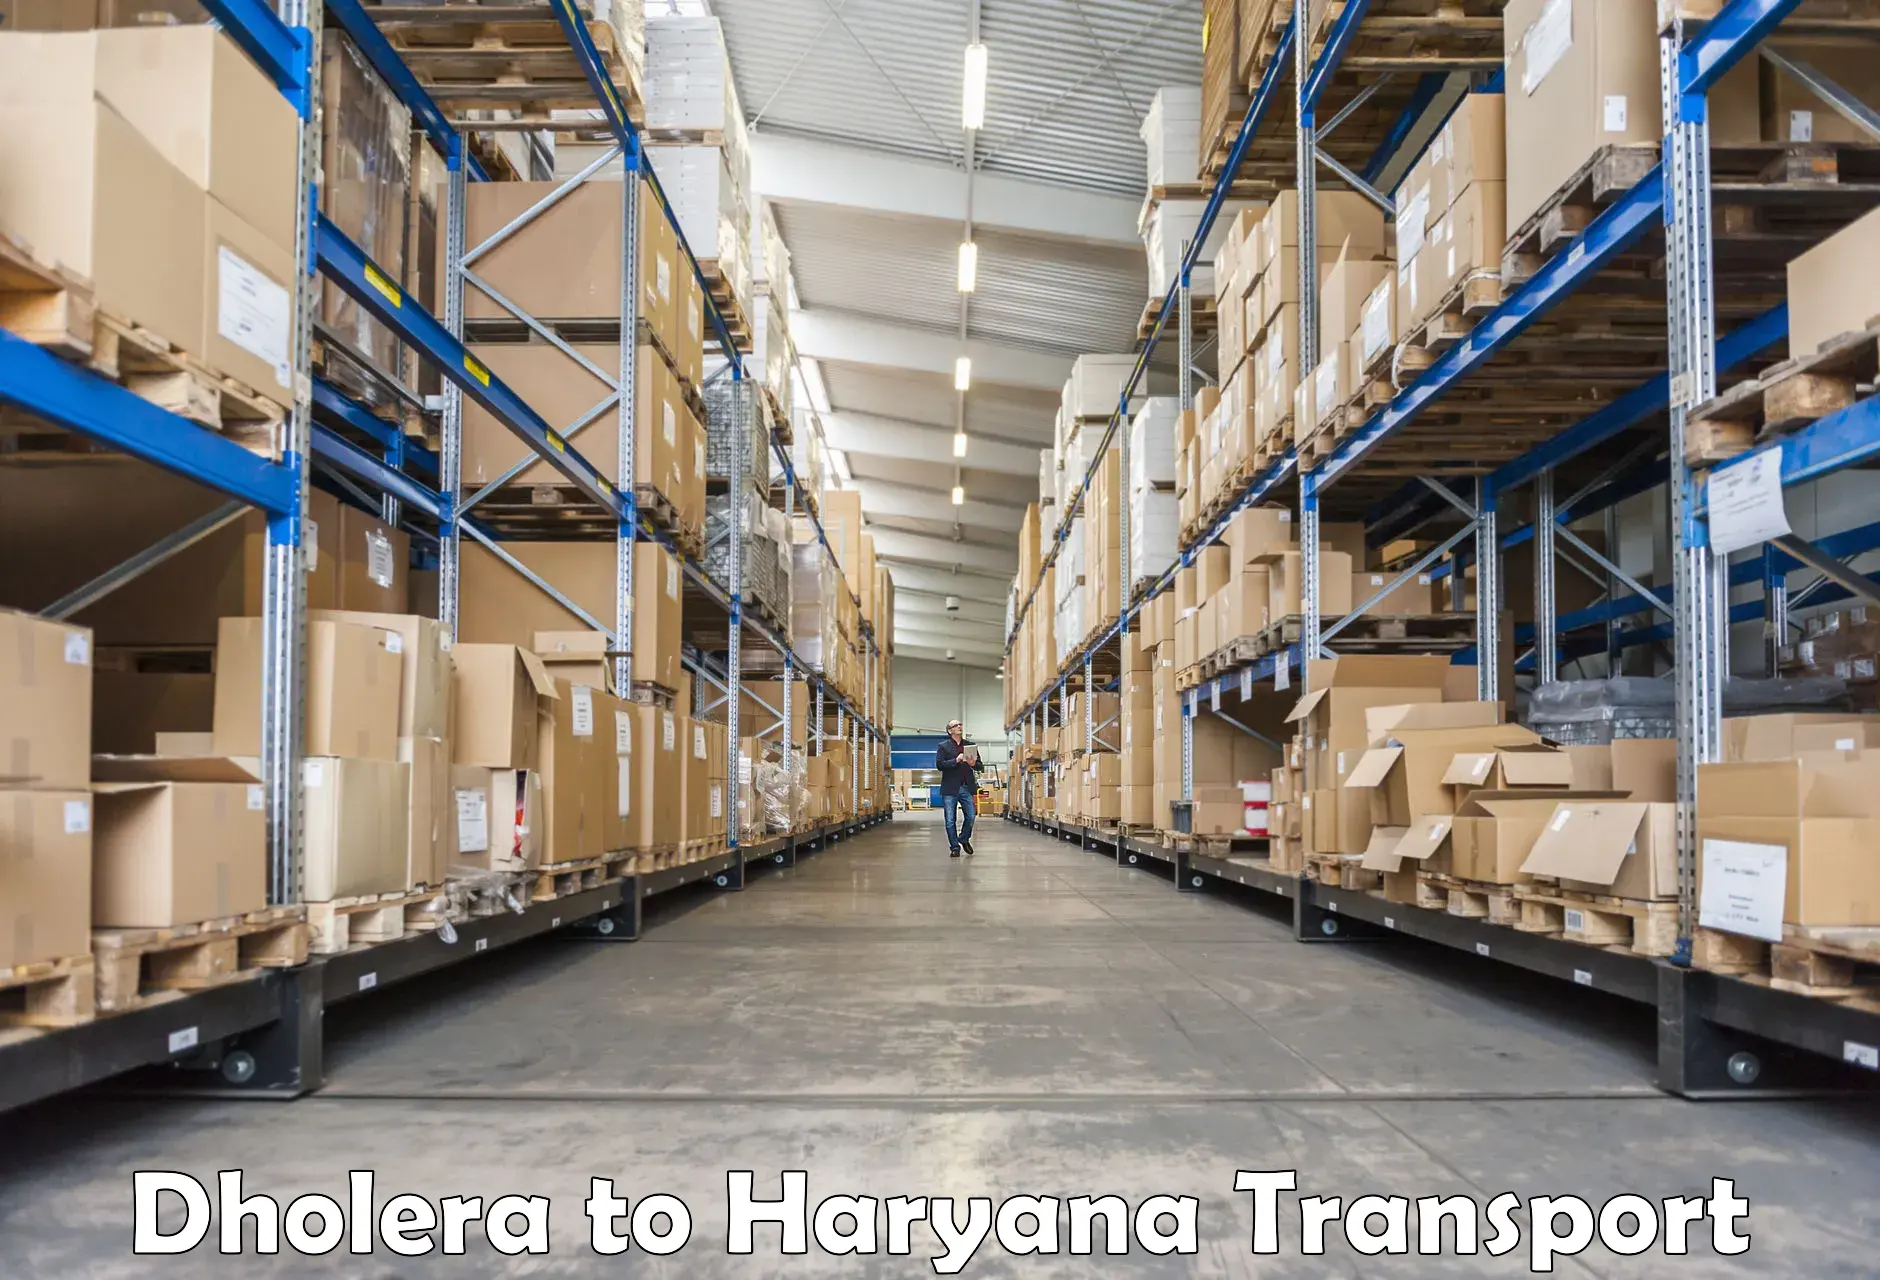 Express transport services Dholera to Bhuna